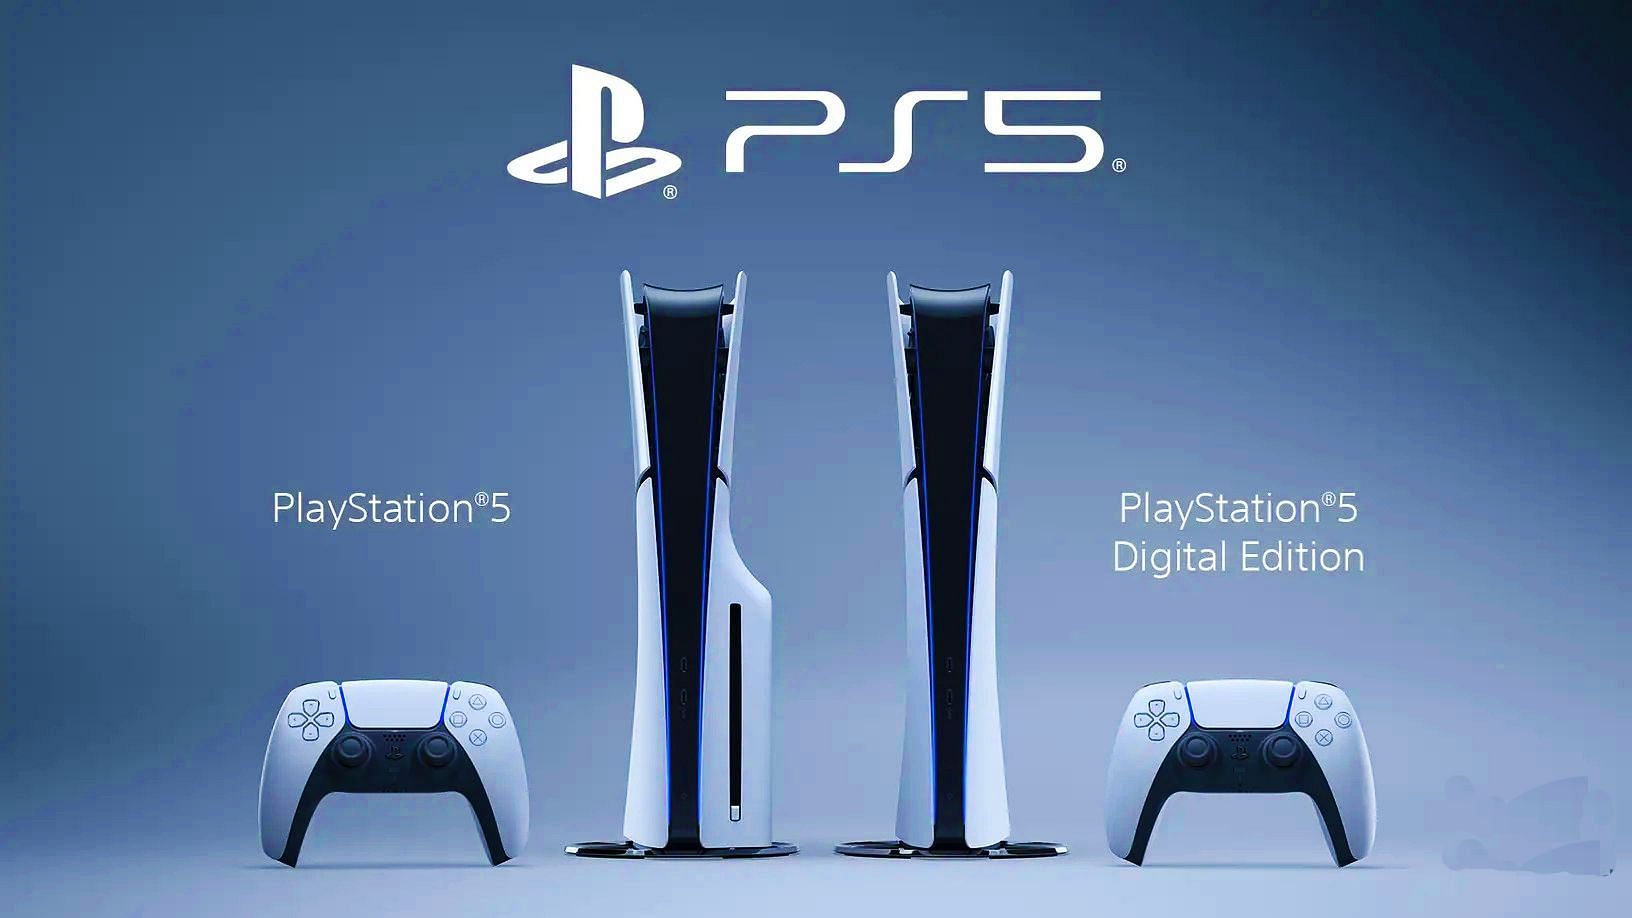 A thorough comparision between the PS5 Digital Edition and the PS5 Slim (Image via Sony)